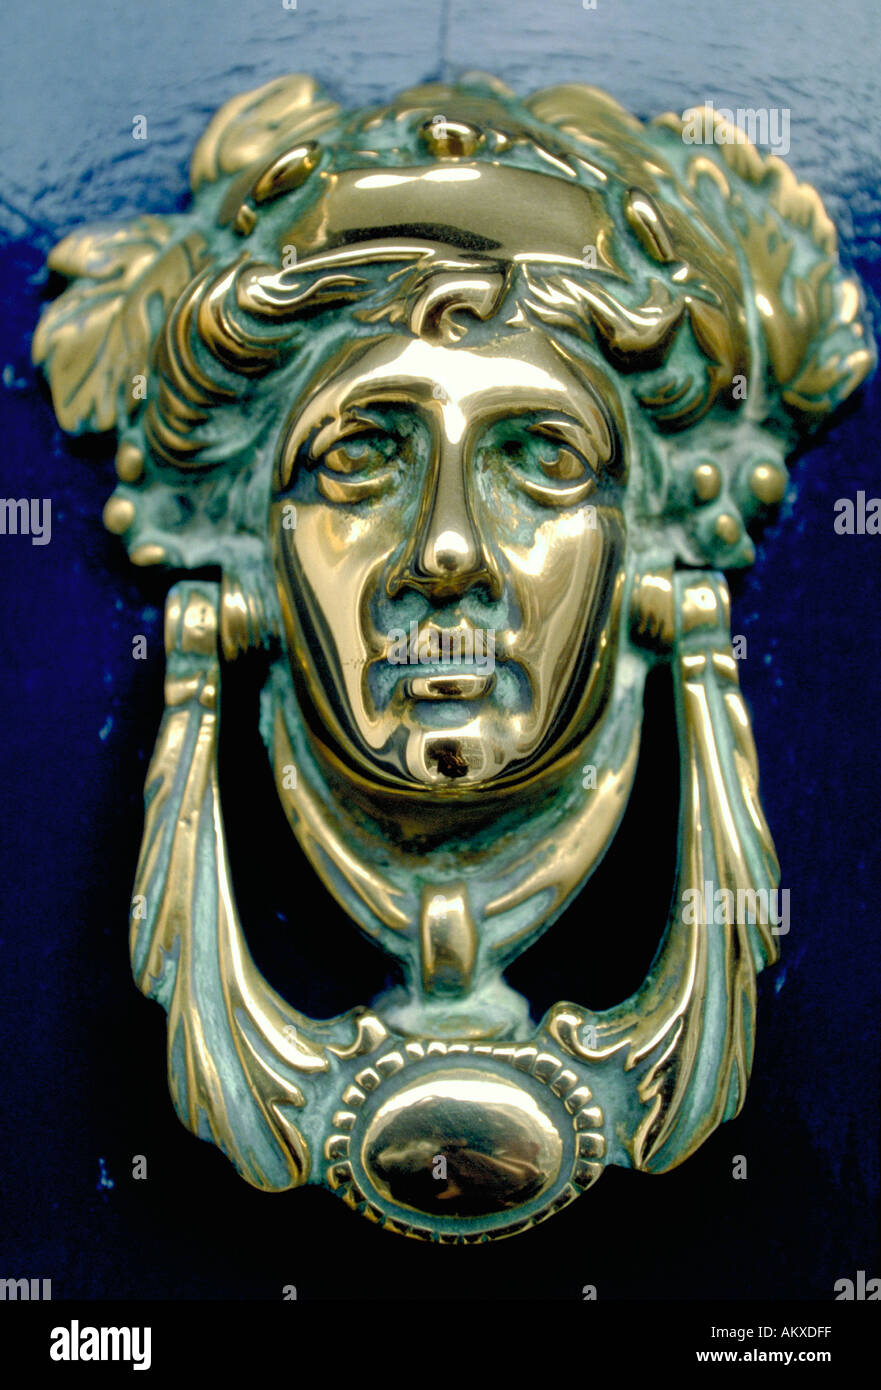 A brass door knocker in the shape of a woman s face with a laurel crown is mounted on a bright blue door Dublin Ireland Stock Photo